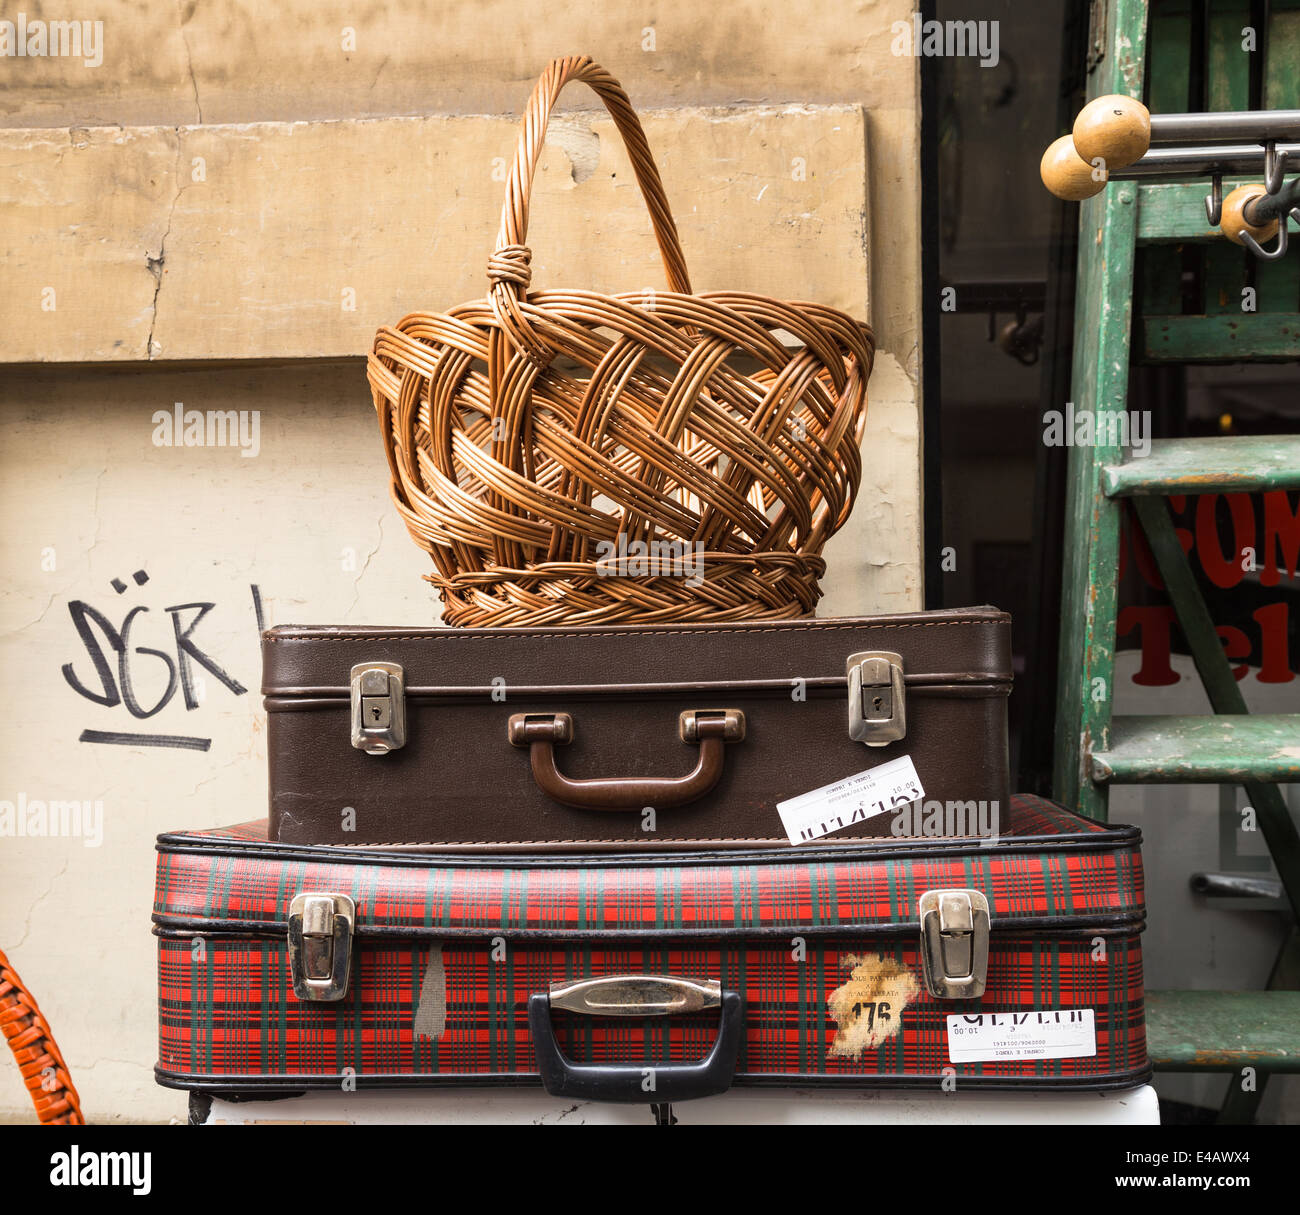 Wicker basket and suitcases in a junk shop display, Turin, Piedmont, Italy. Stock Photo